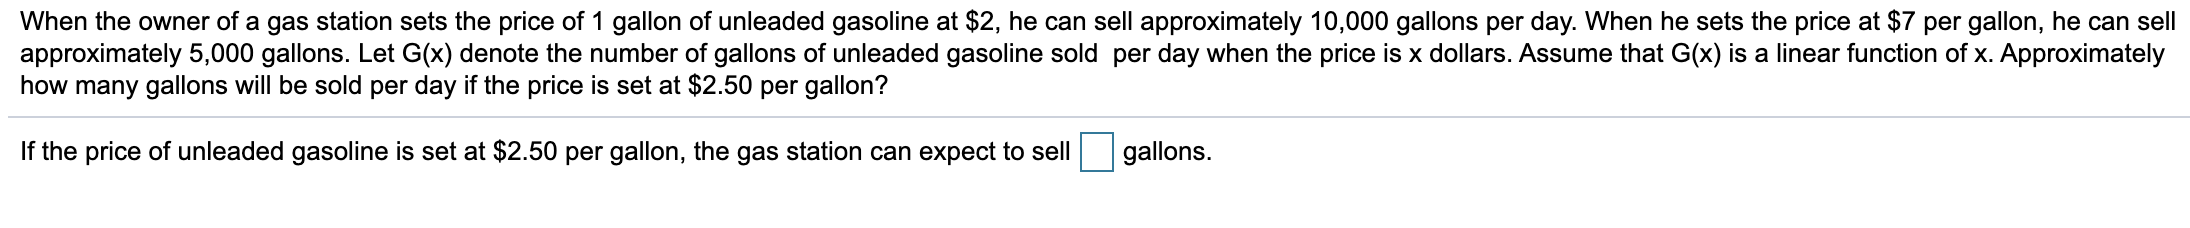 When the owner of a gas station sets the price of 1 gallon of unleaded gasoline at $2, he can sell approximately 10,000 gallons per day. When he sets the price at $7 per gallon, he can sell
approximately 5,000 gallons. Let G(x) denote the number of gallons of unleaded gasoline sold per day when the price is x dollars. Assume that G(x) is a linear function of x. Approximately
how many gallons will be sold per day if the price is set at $2.50 per gallon?
If the price of unleaded gasoline is set at $2.50 per gallon, the gas station can expect to sell
gallons.
